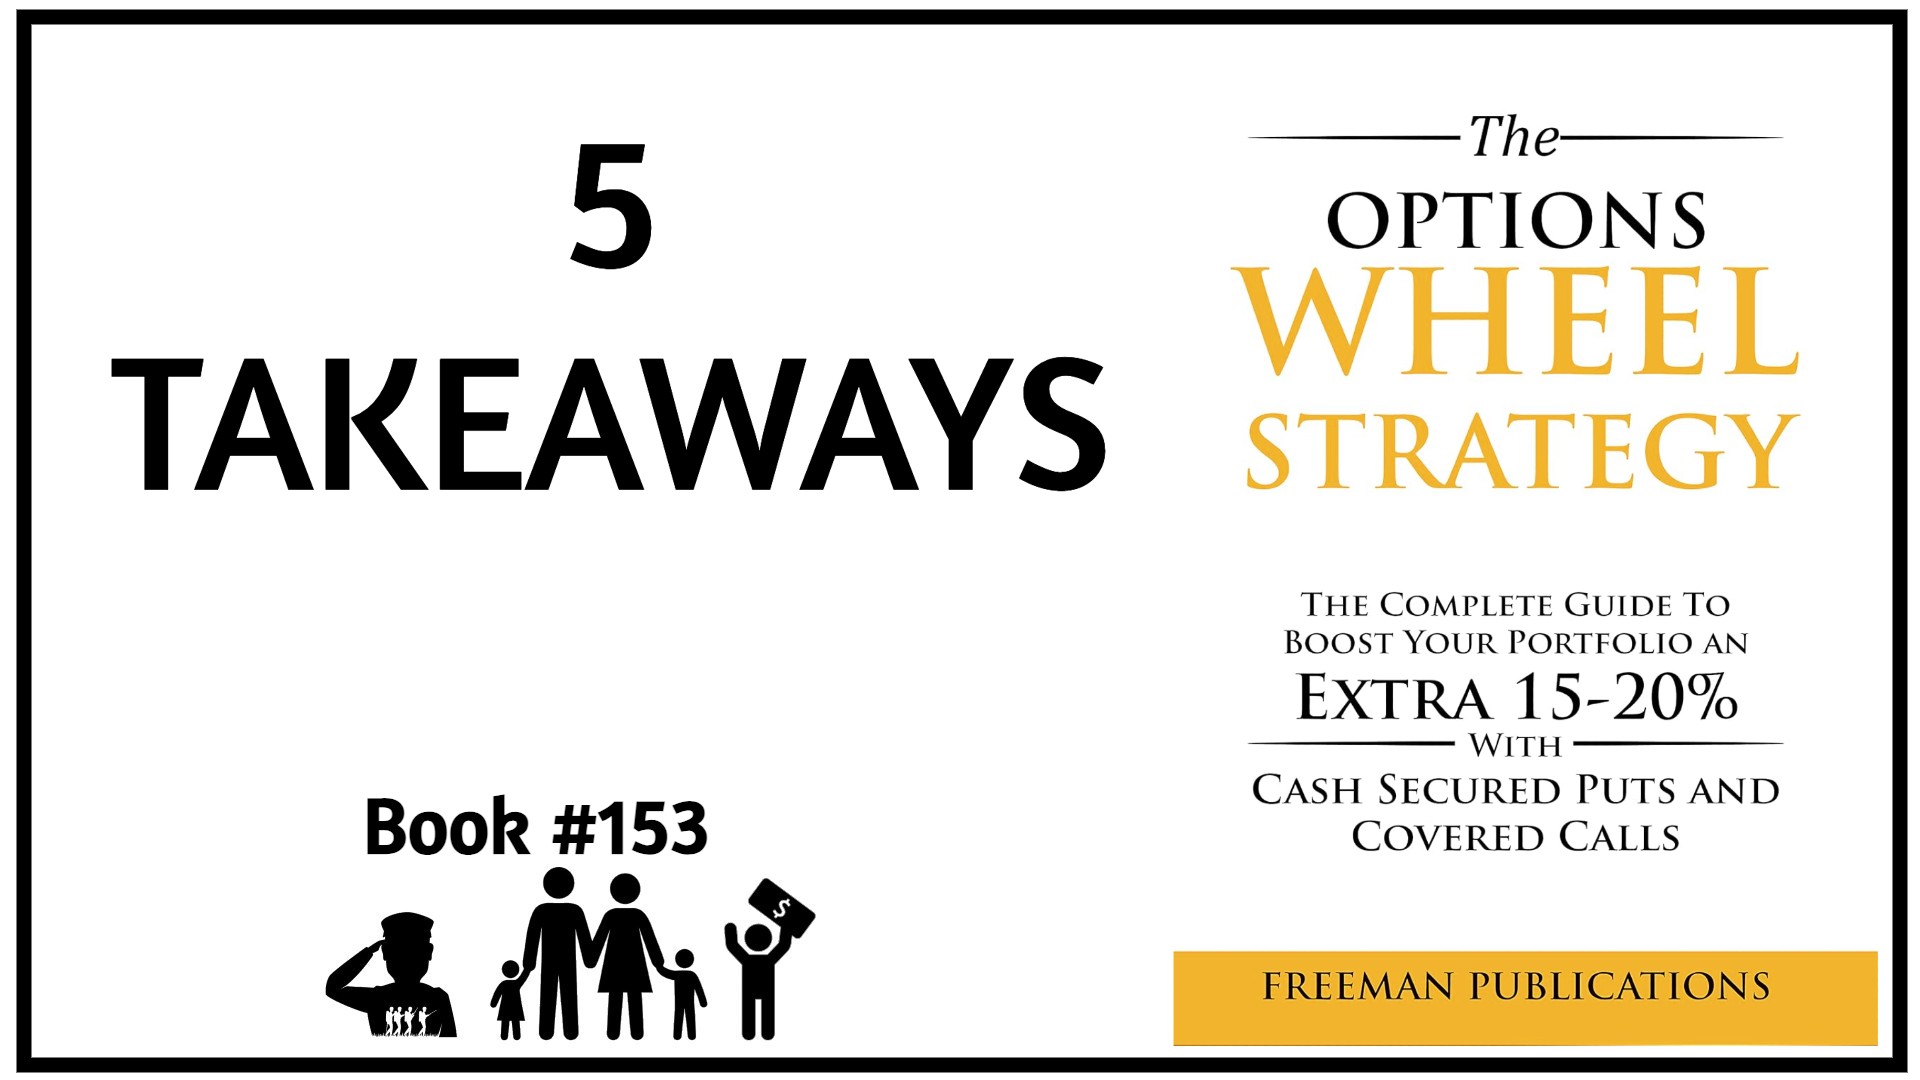 5 Takeaways from “The Options Wheel Strategy”